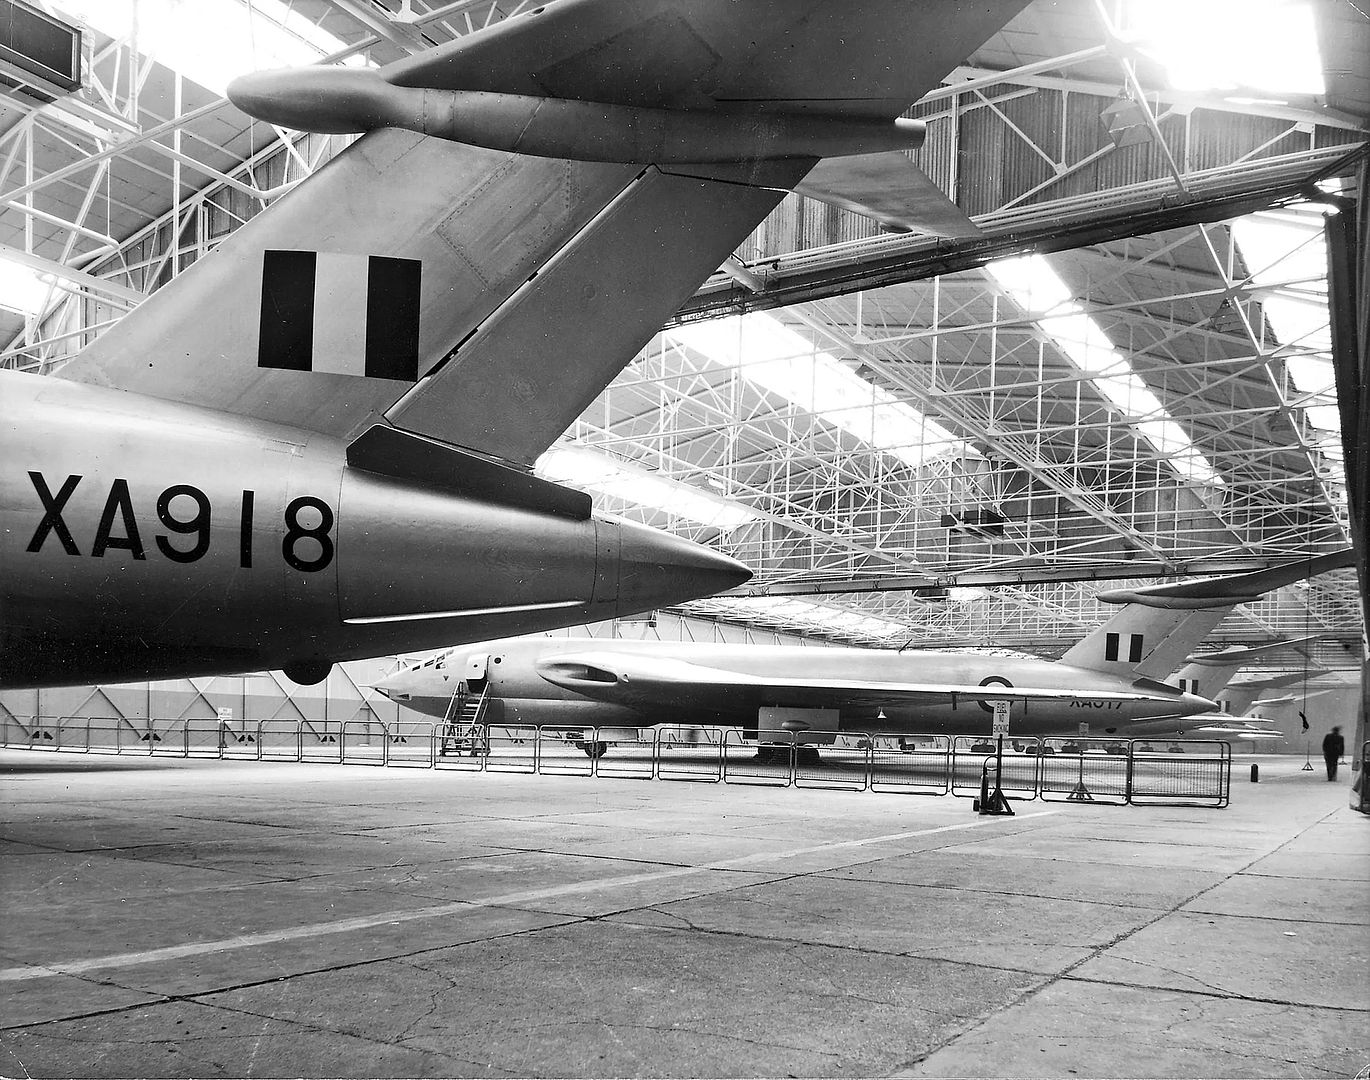 The First Five Production Victors In The Handley Page Aircraft Assembly Hall At Radlett In March 1956